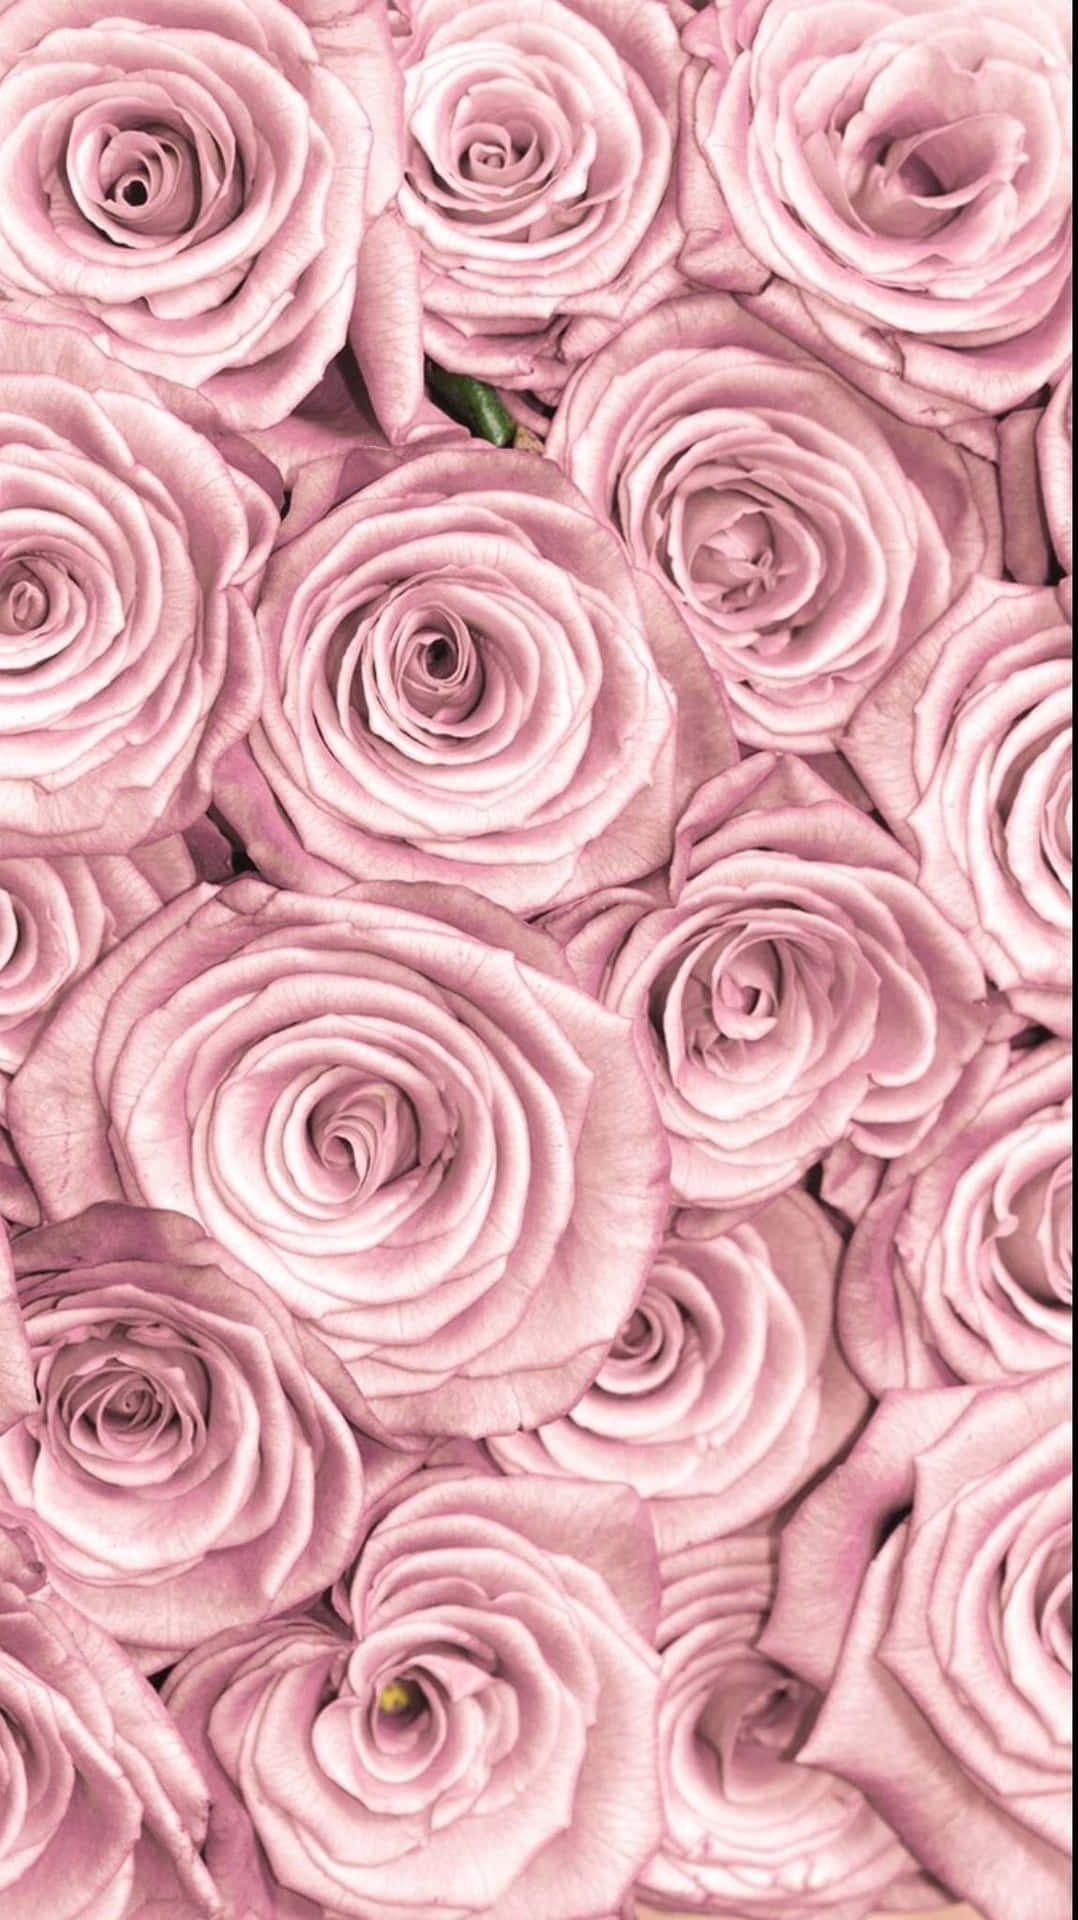 A delicate pink rose, made up of pulsing layers of petal around a vibrant yellow centre. Wallpaper